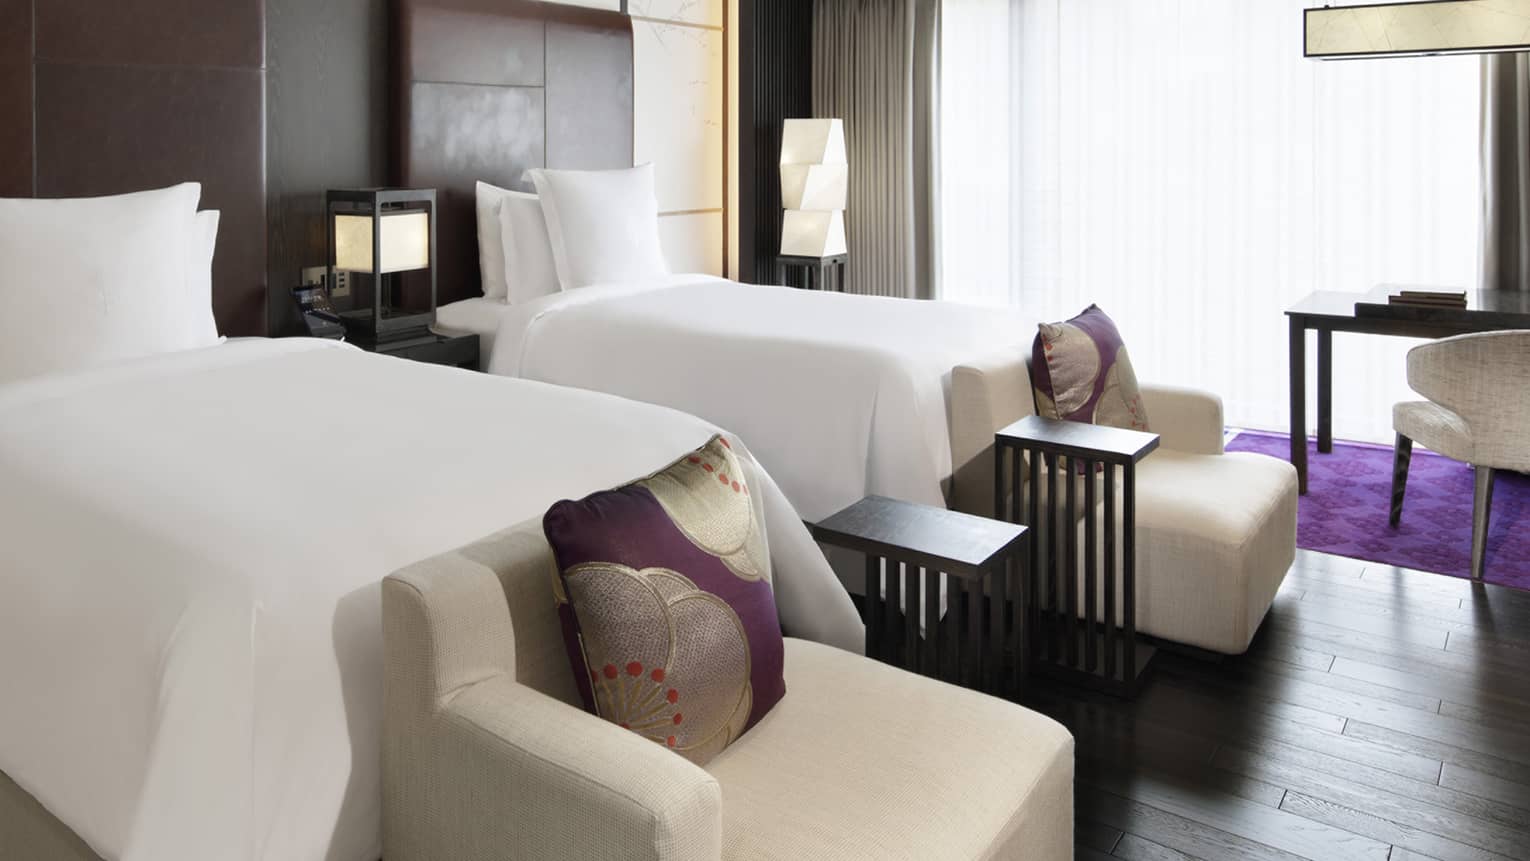 Hotel room with two twin beds, wooden floors, beige arm chairs, purple rug